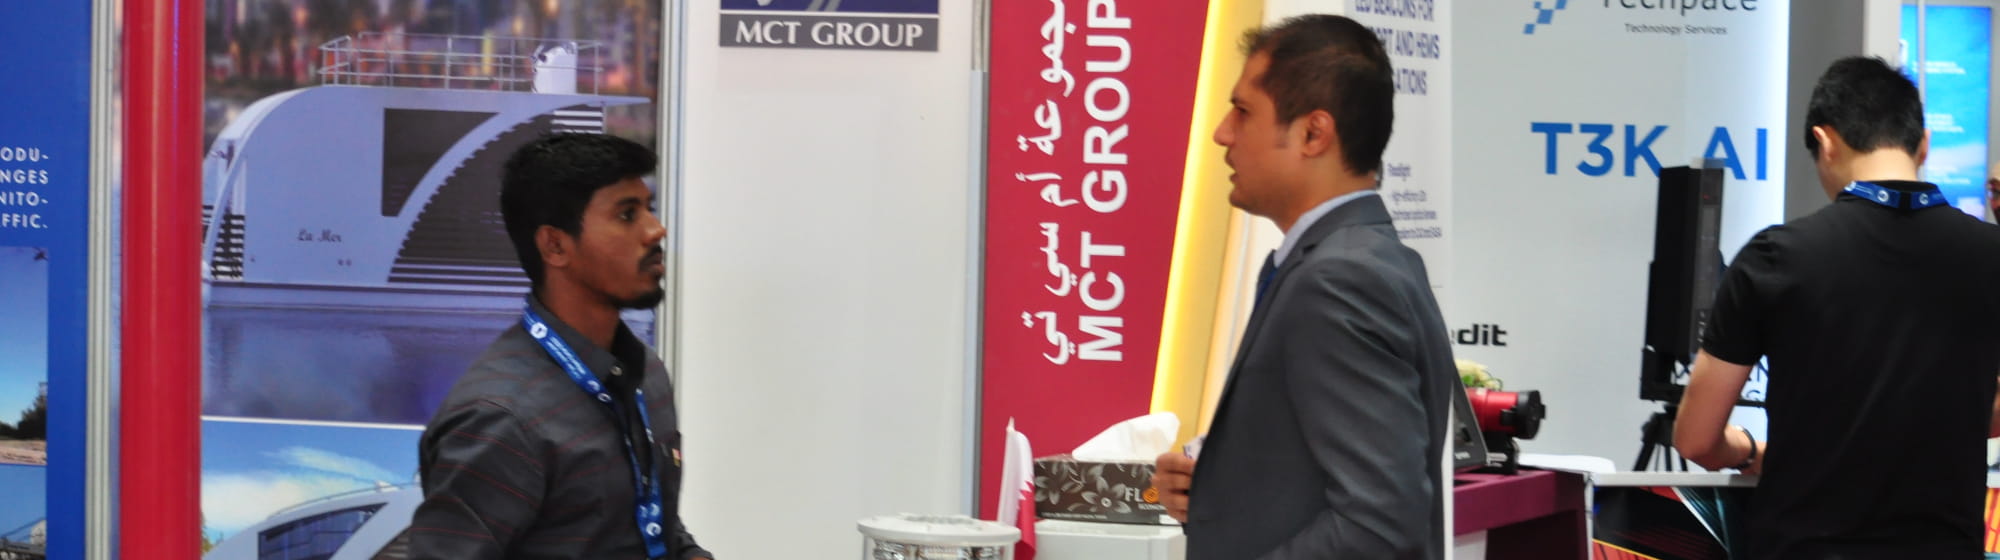 Visitors on the MCT Group's stand at Milipol Qatar